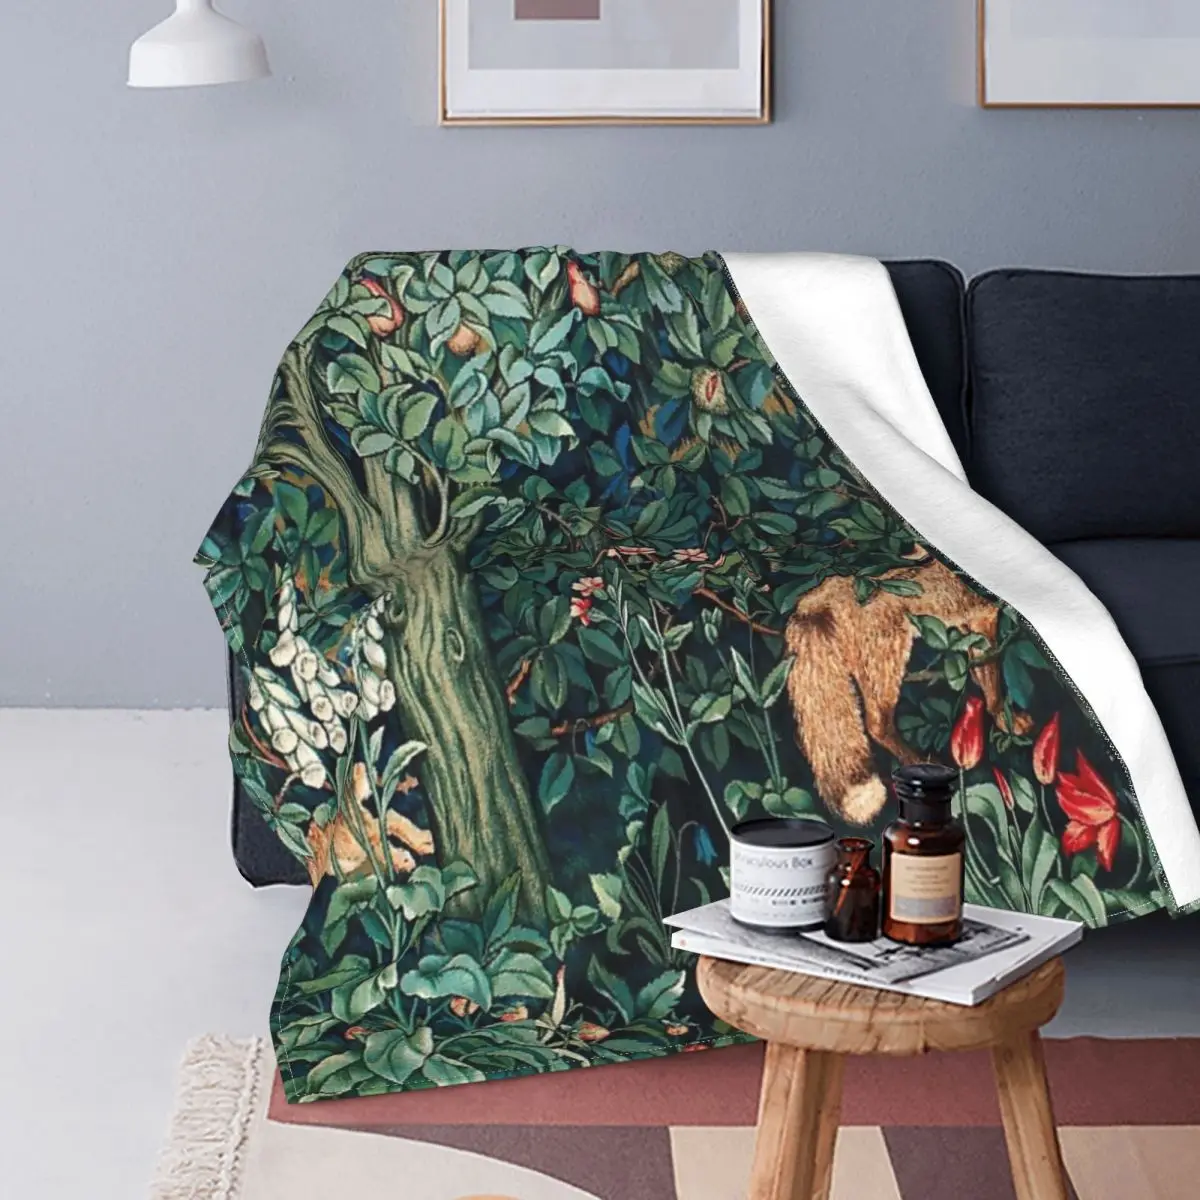 

GREENERY, FOREST ANIMALS Fox And Hares Blue Green Floral Tapestry Blankets Flannel Throw Blankets Sofa Blanket Throws Quilt